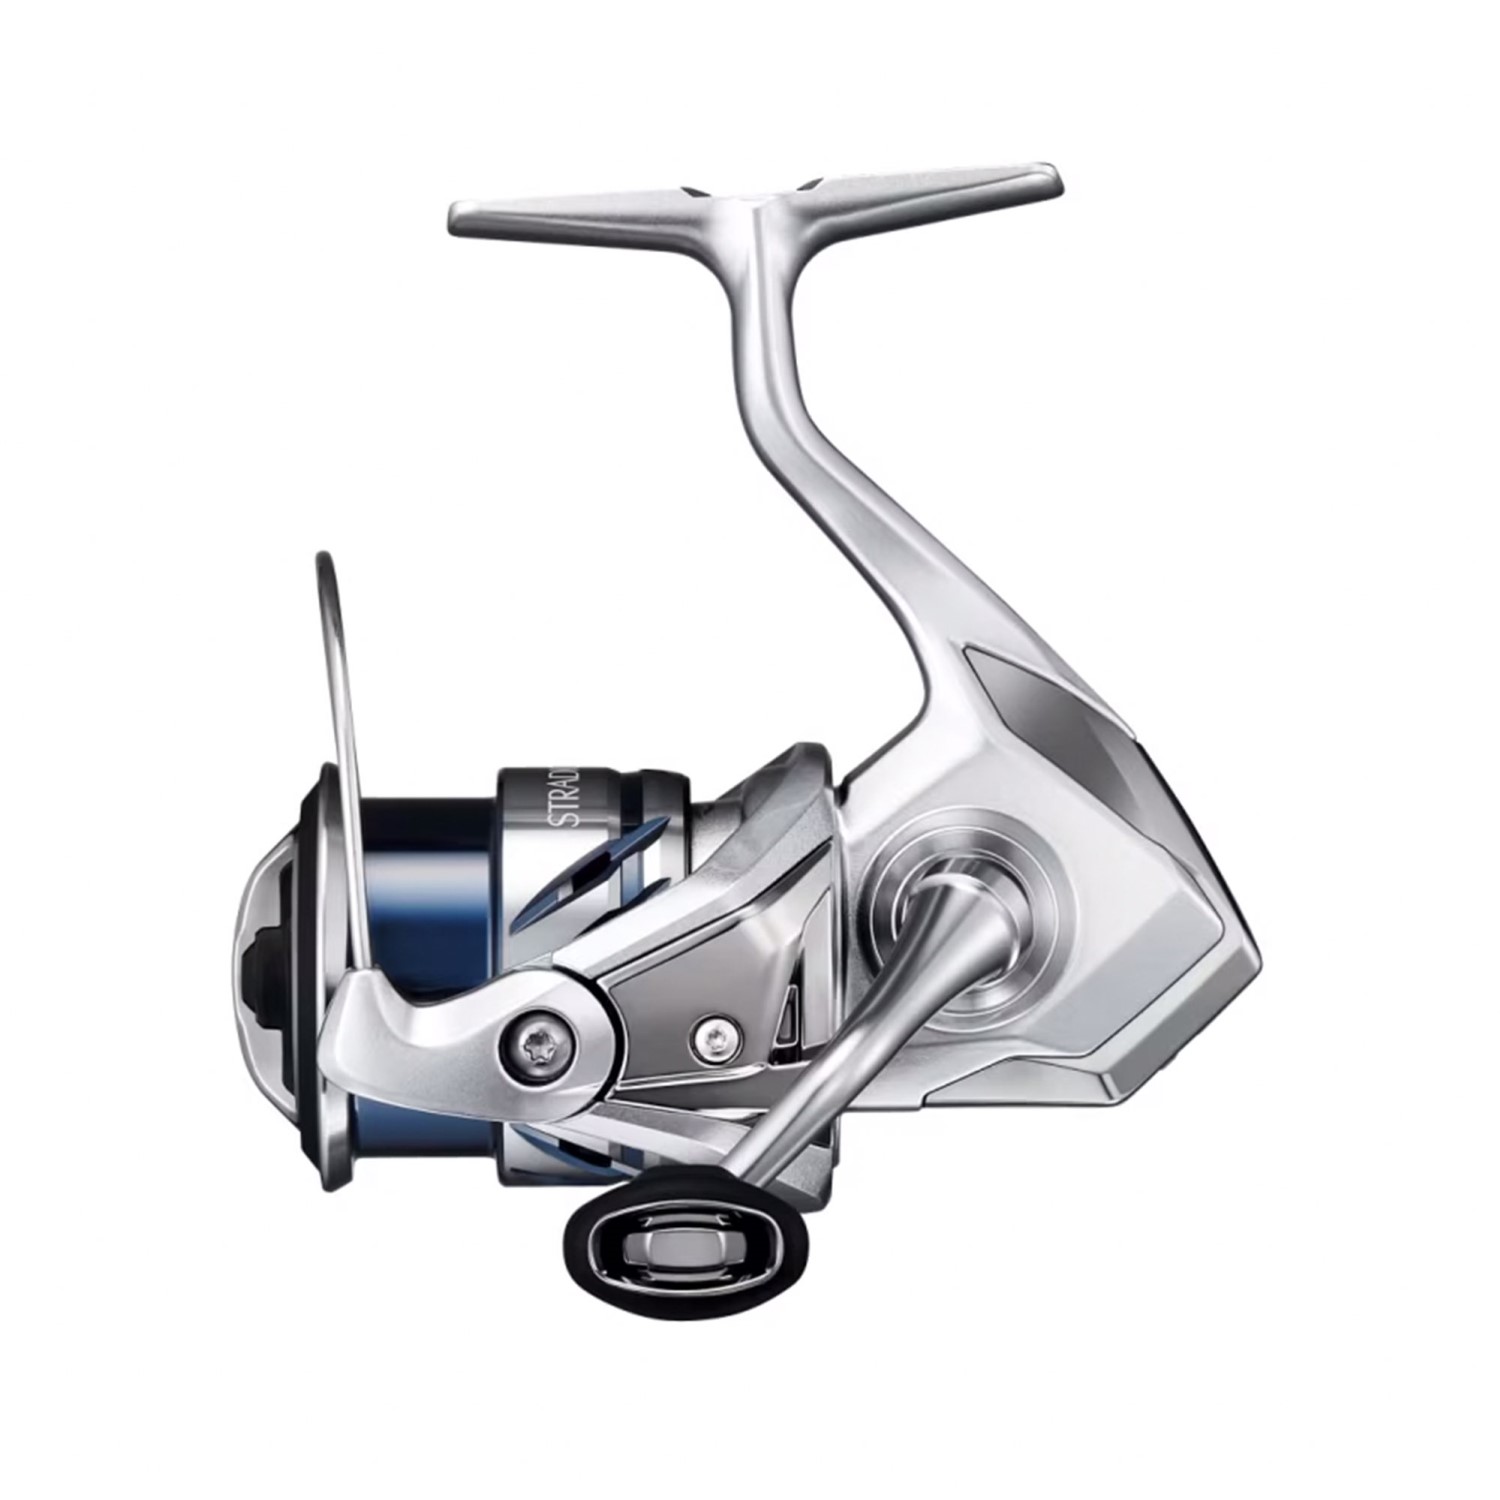 Shimano Stradic FM Spinnrolle Angelrolle Frontbremsrolle 1000-5000